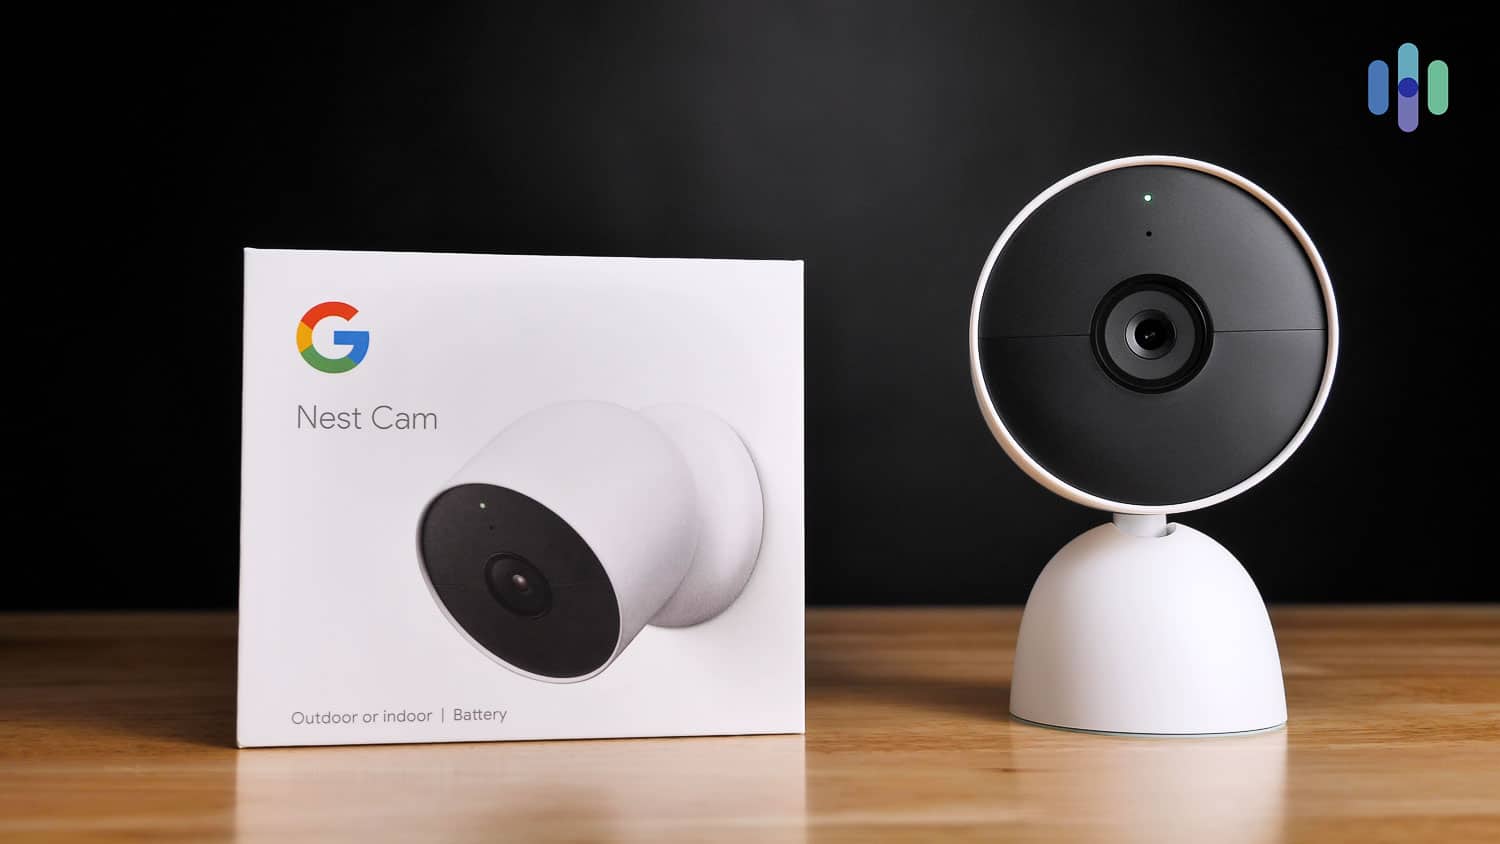 Google Nest Cam and its packaging